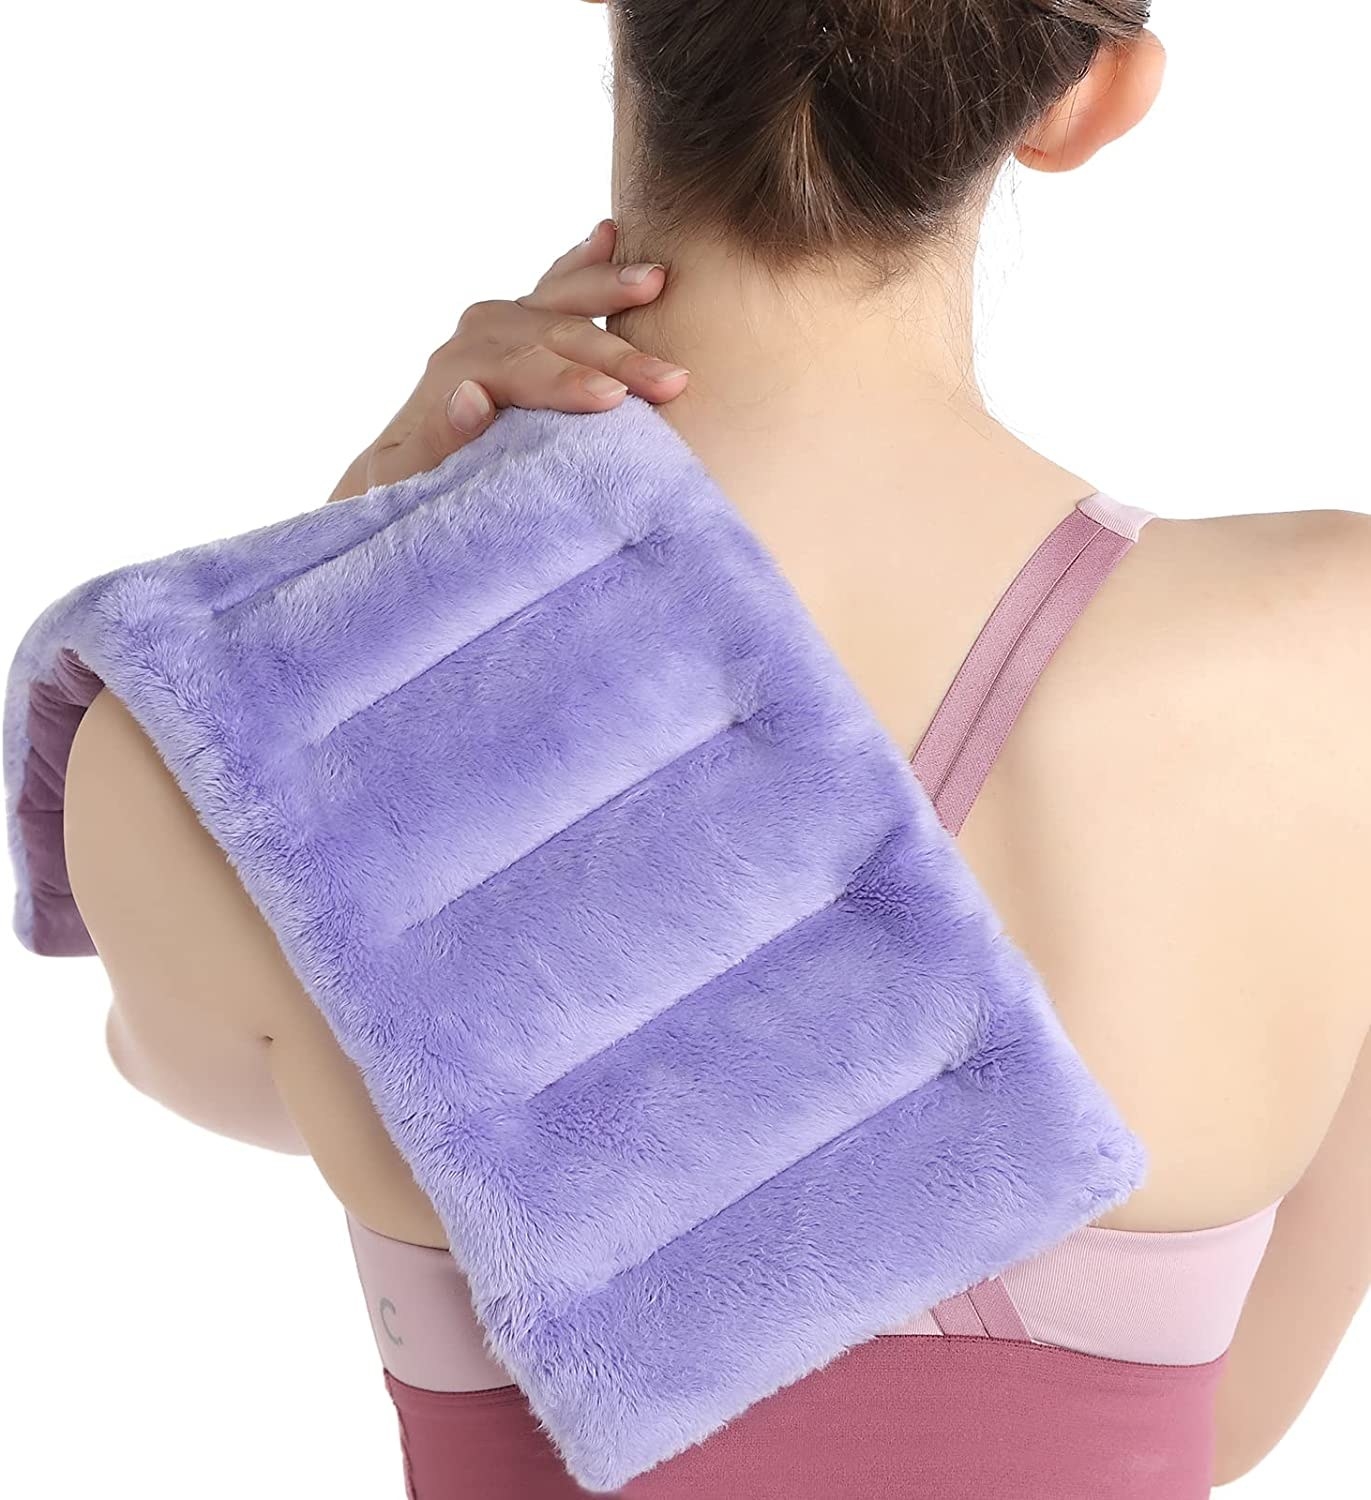 A person with the microwavable heating pad on their shoulder